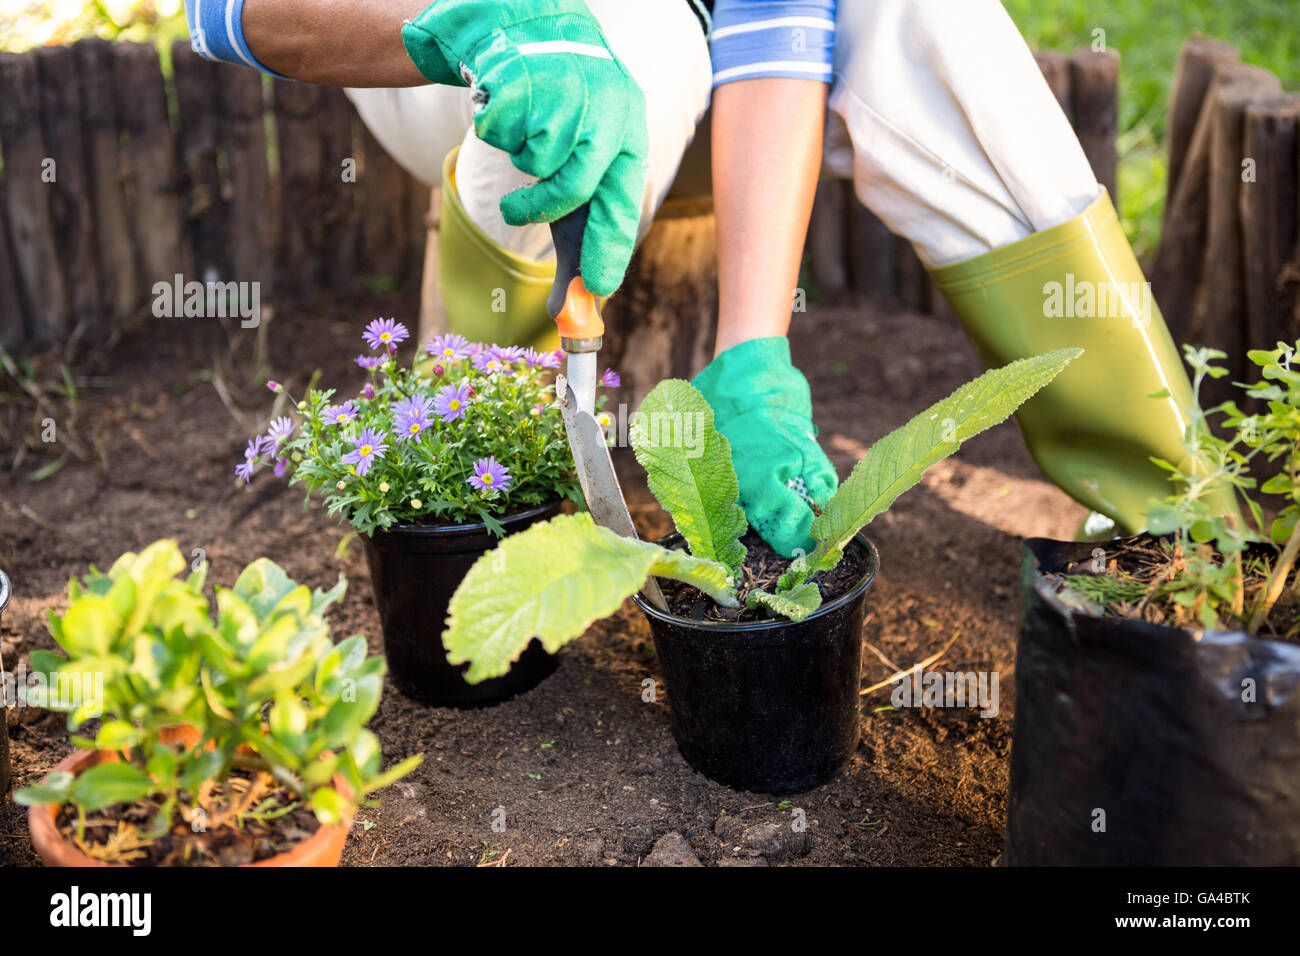 Gardener planting potted plants at garden Stock Photo